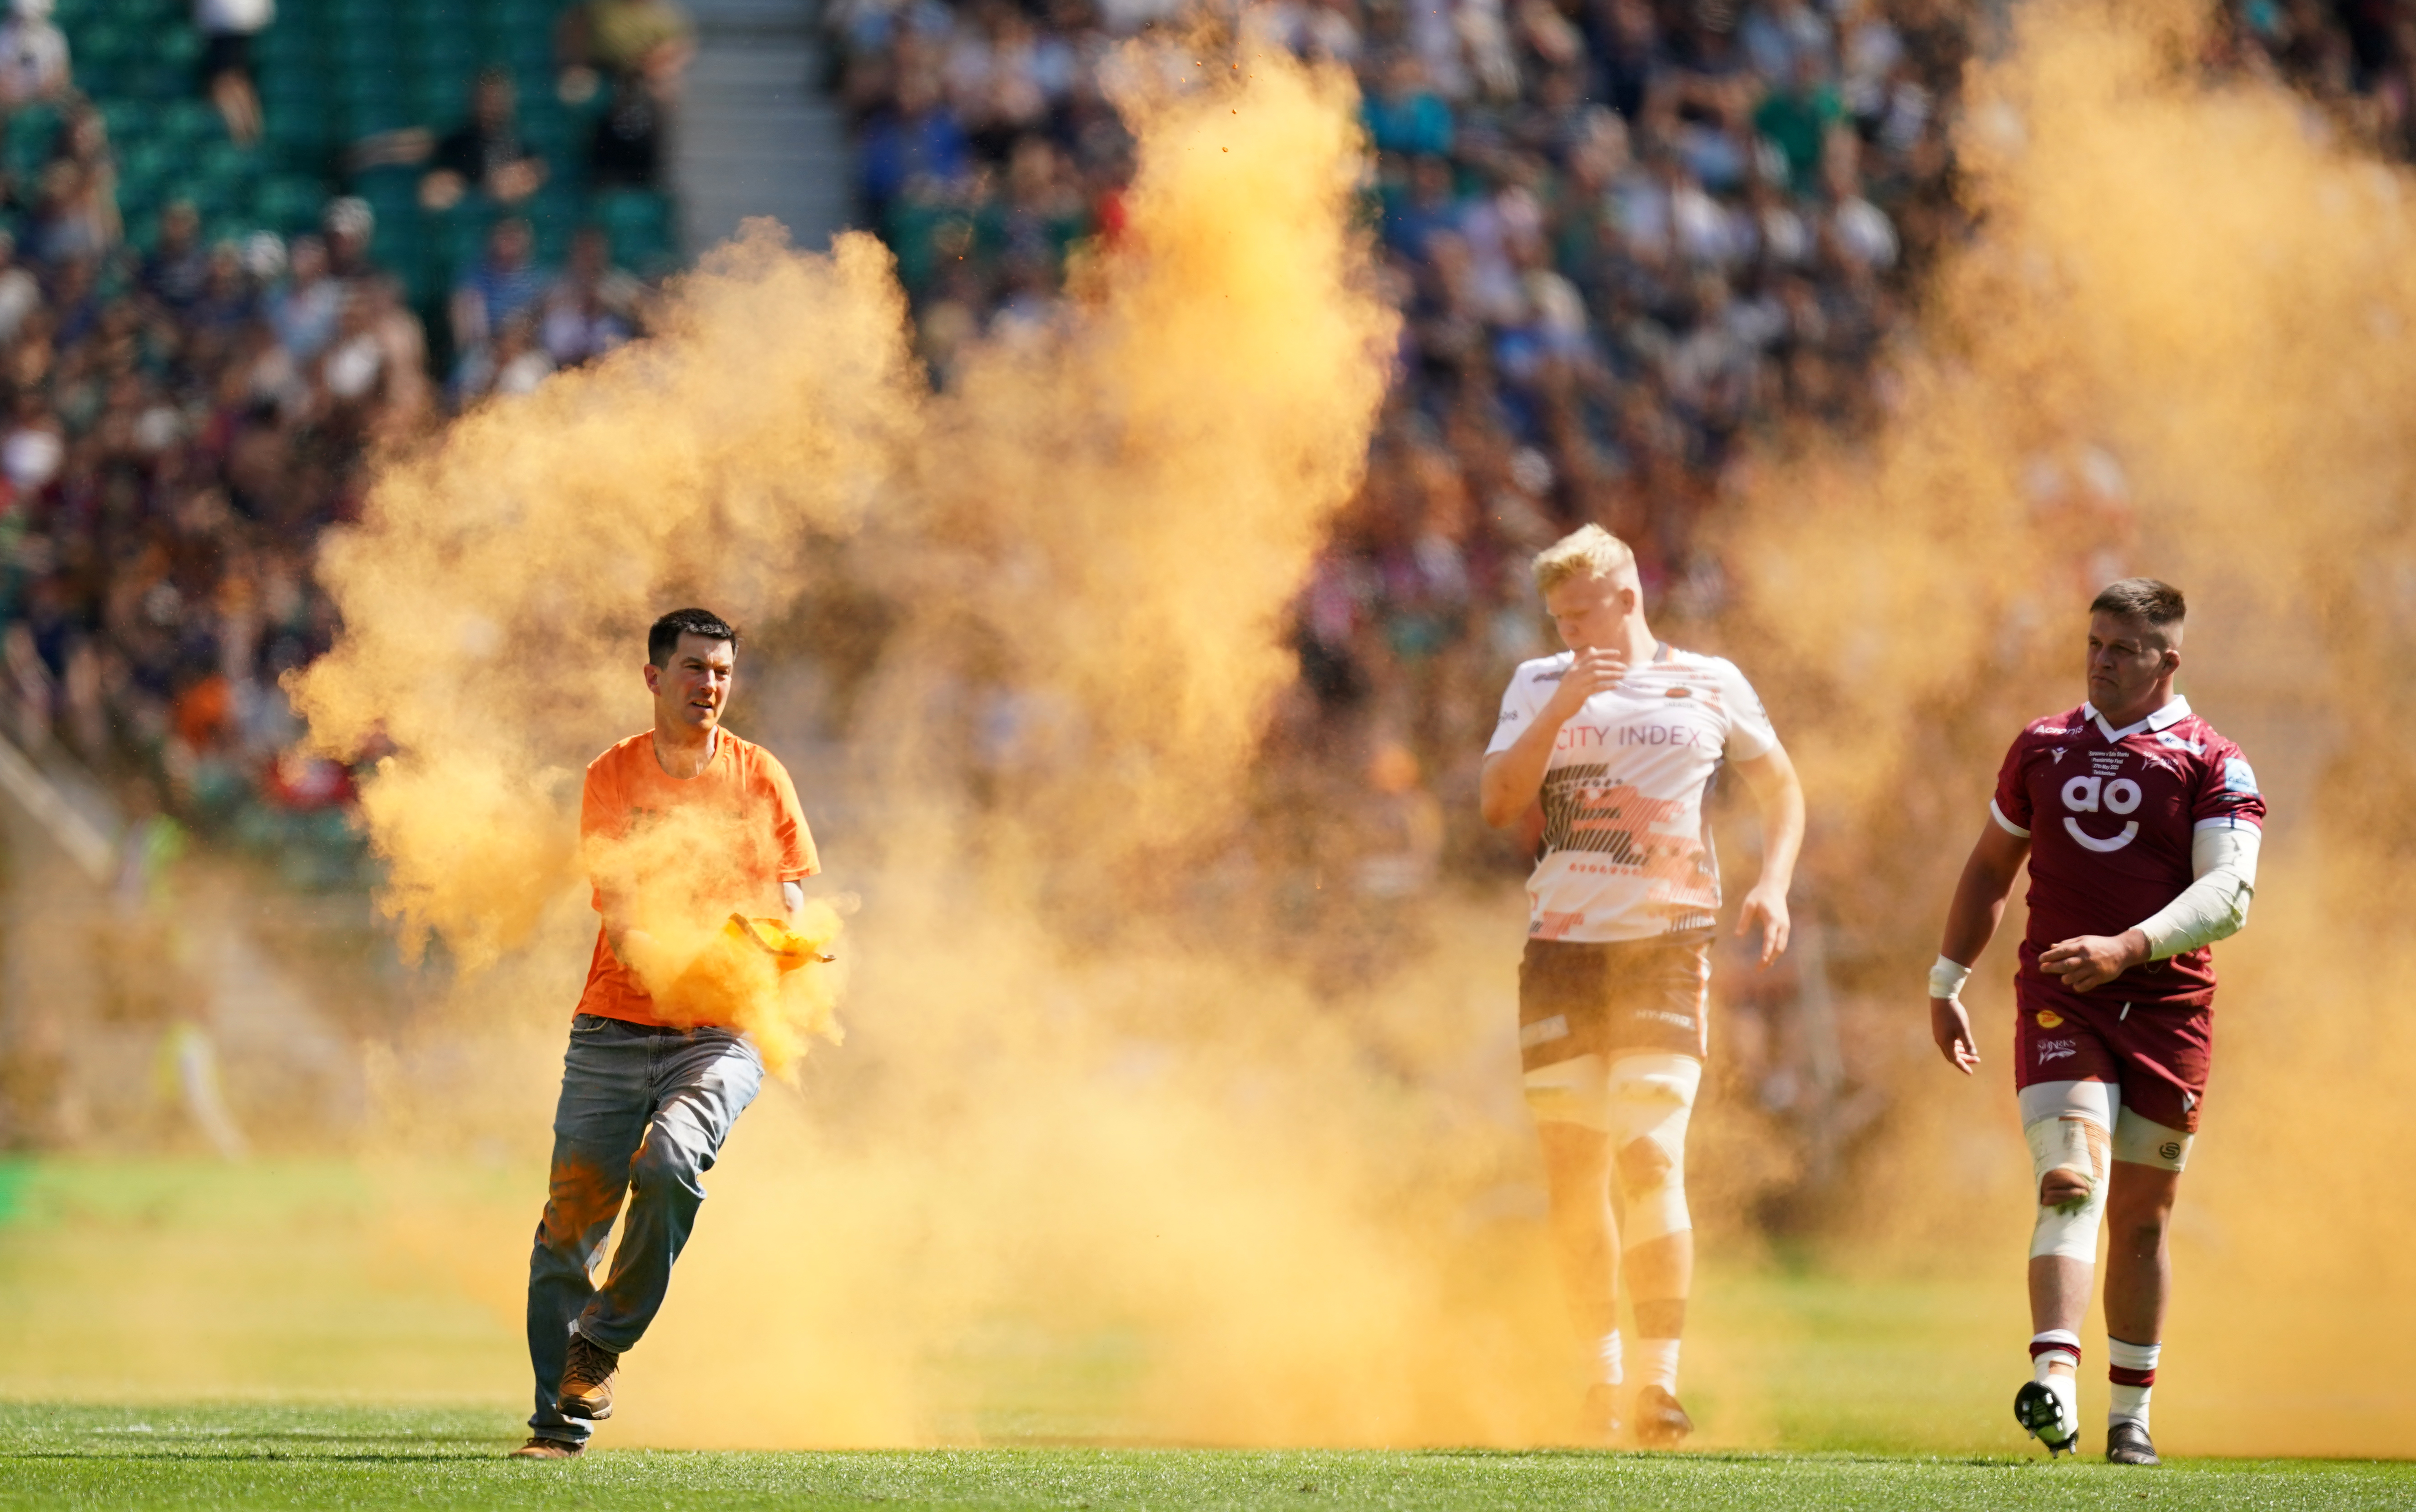 A Just Stop Oil protester throws orange powder on the pitch during the Gallagher Premiership final